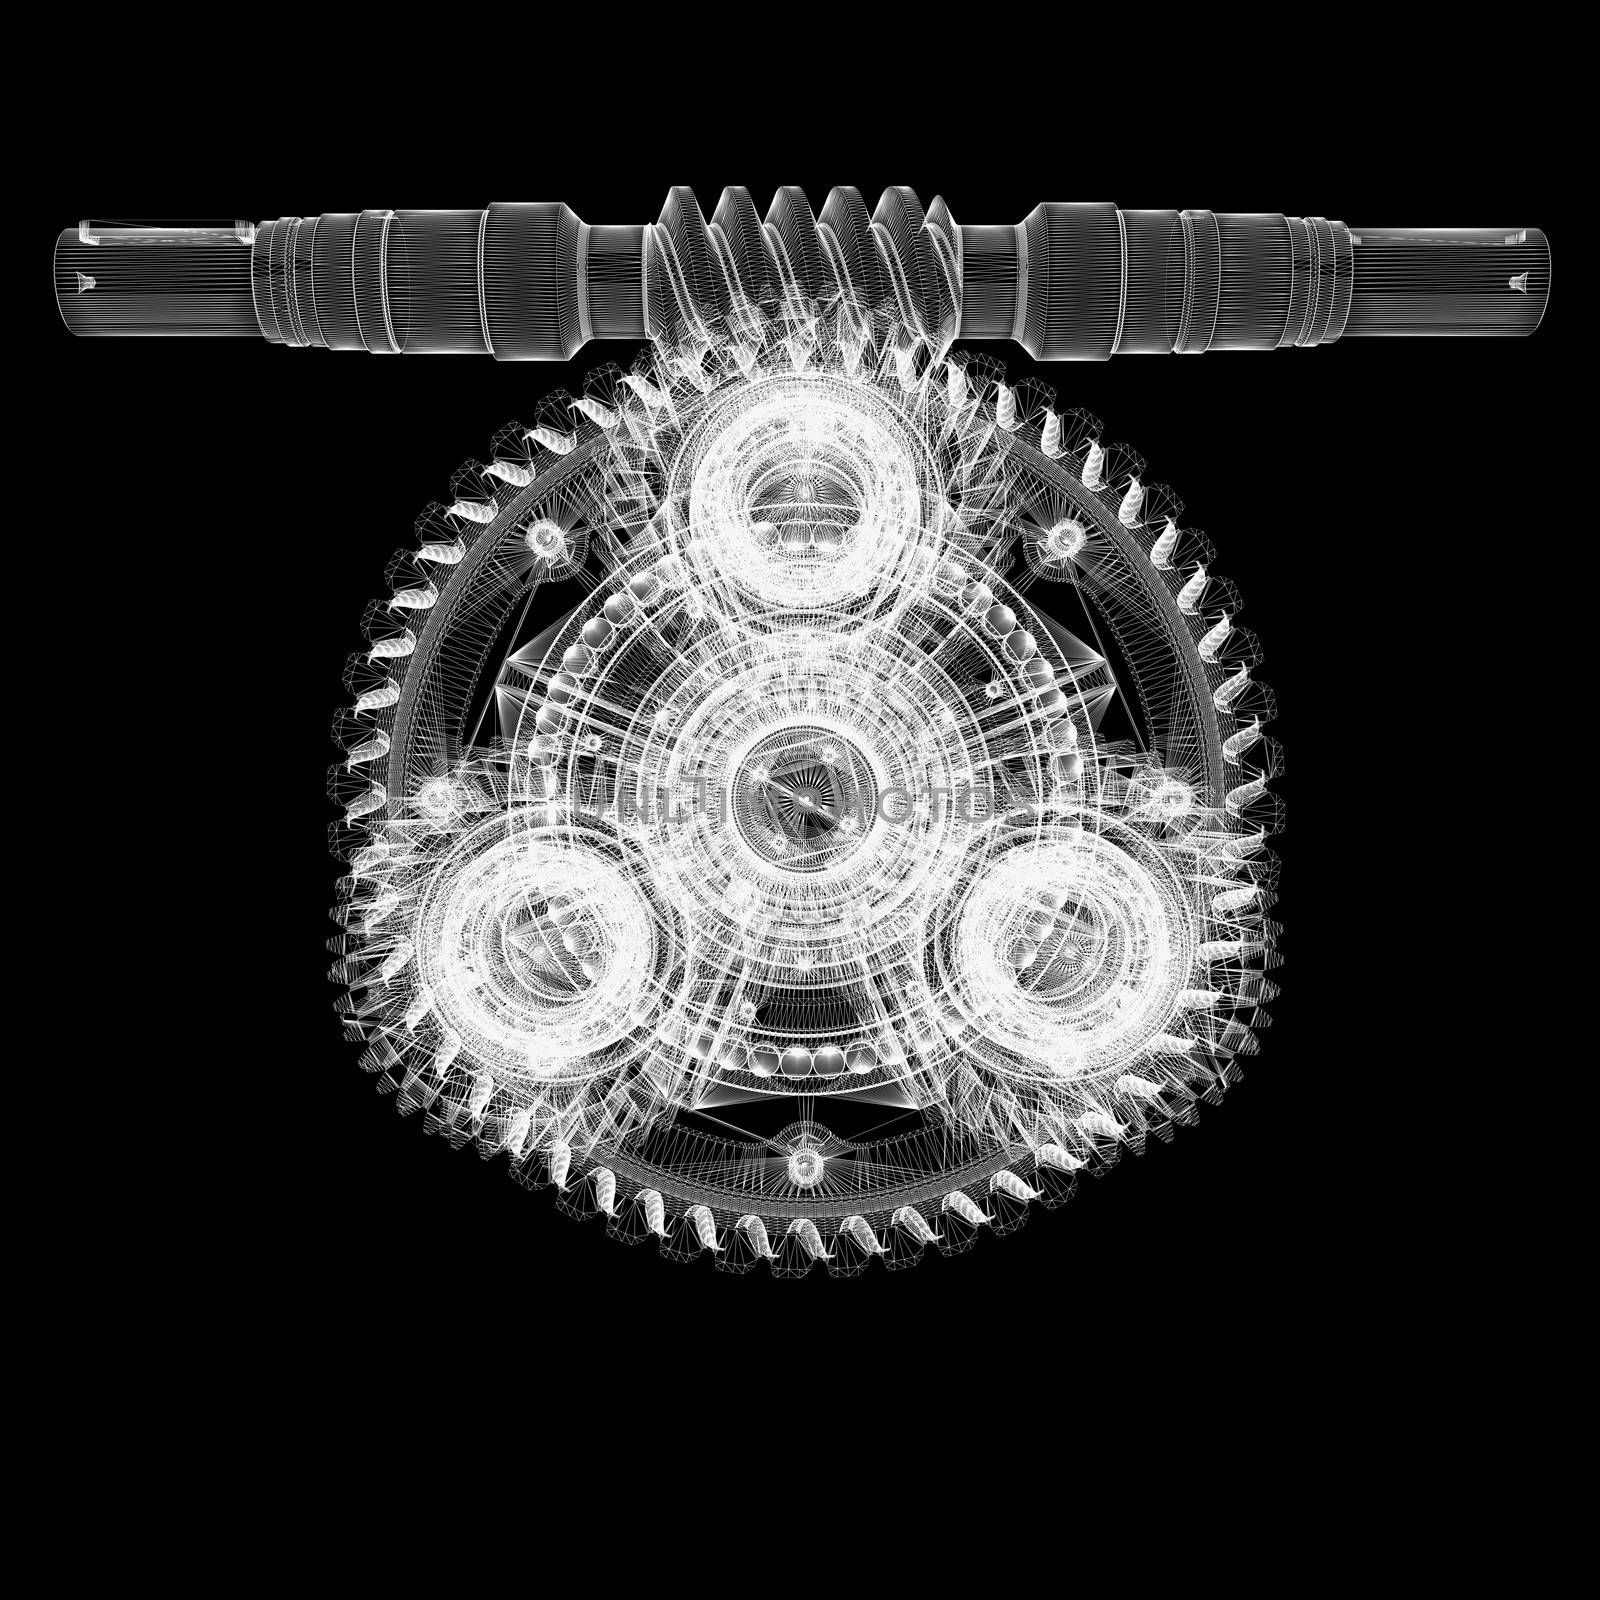 Wire frame gears. 3d rendering on black background